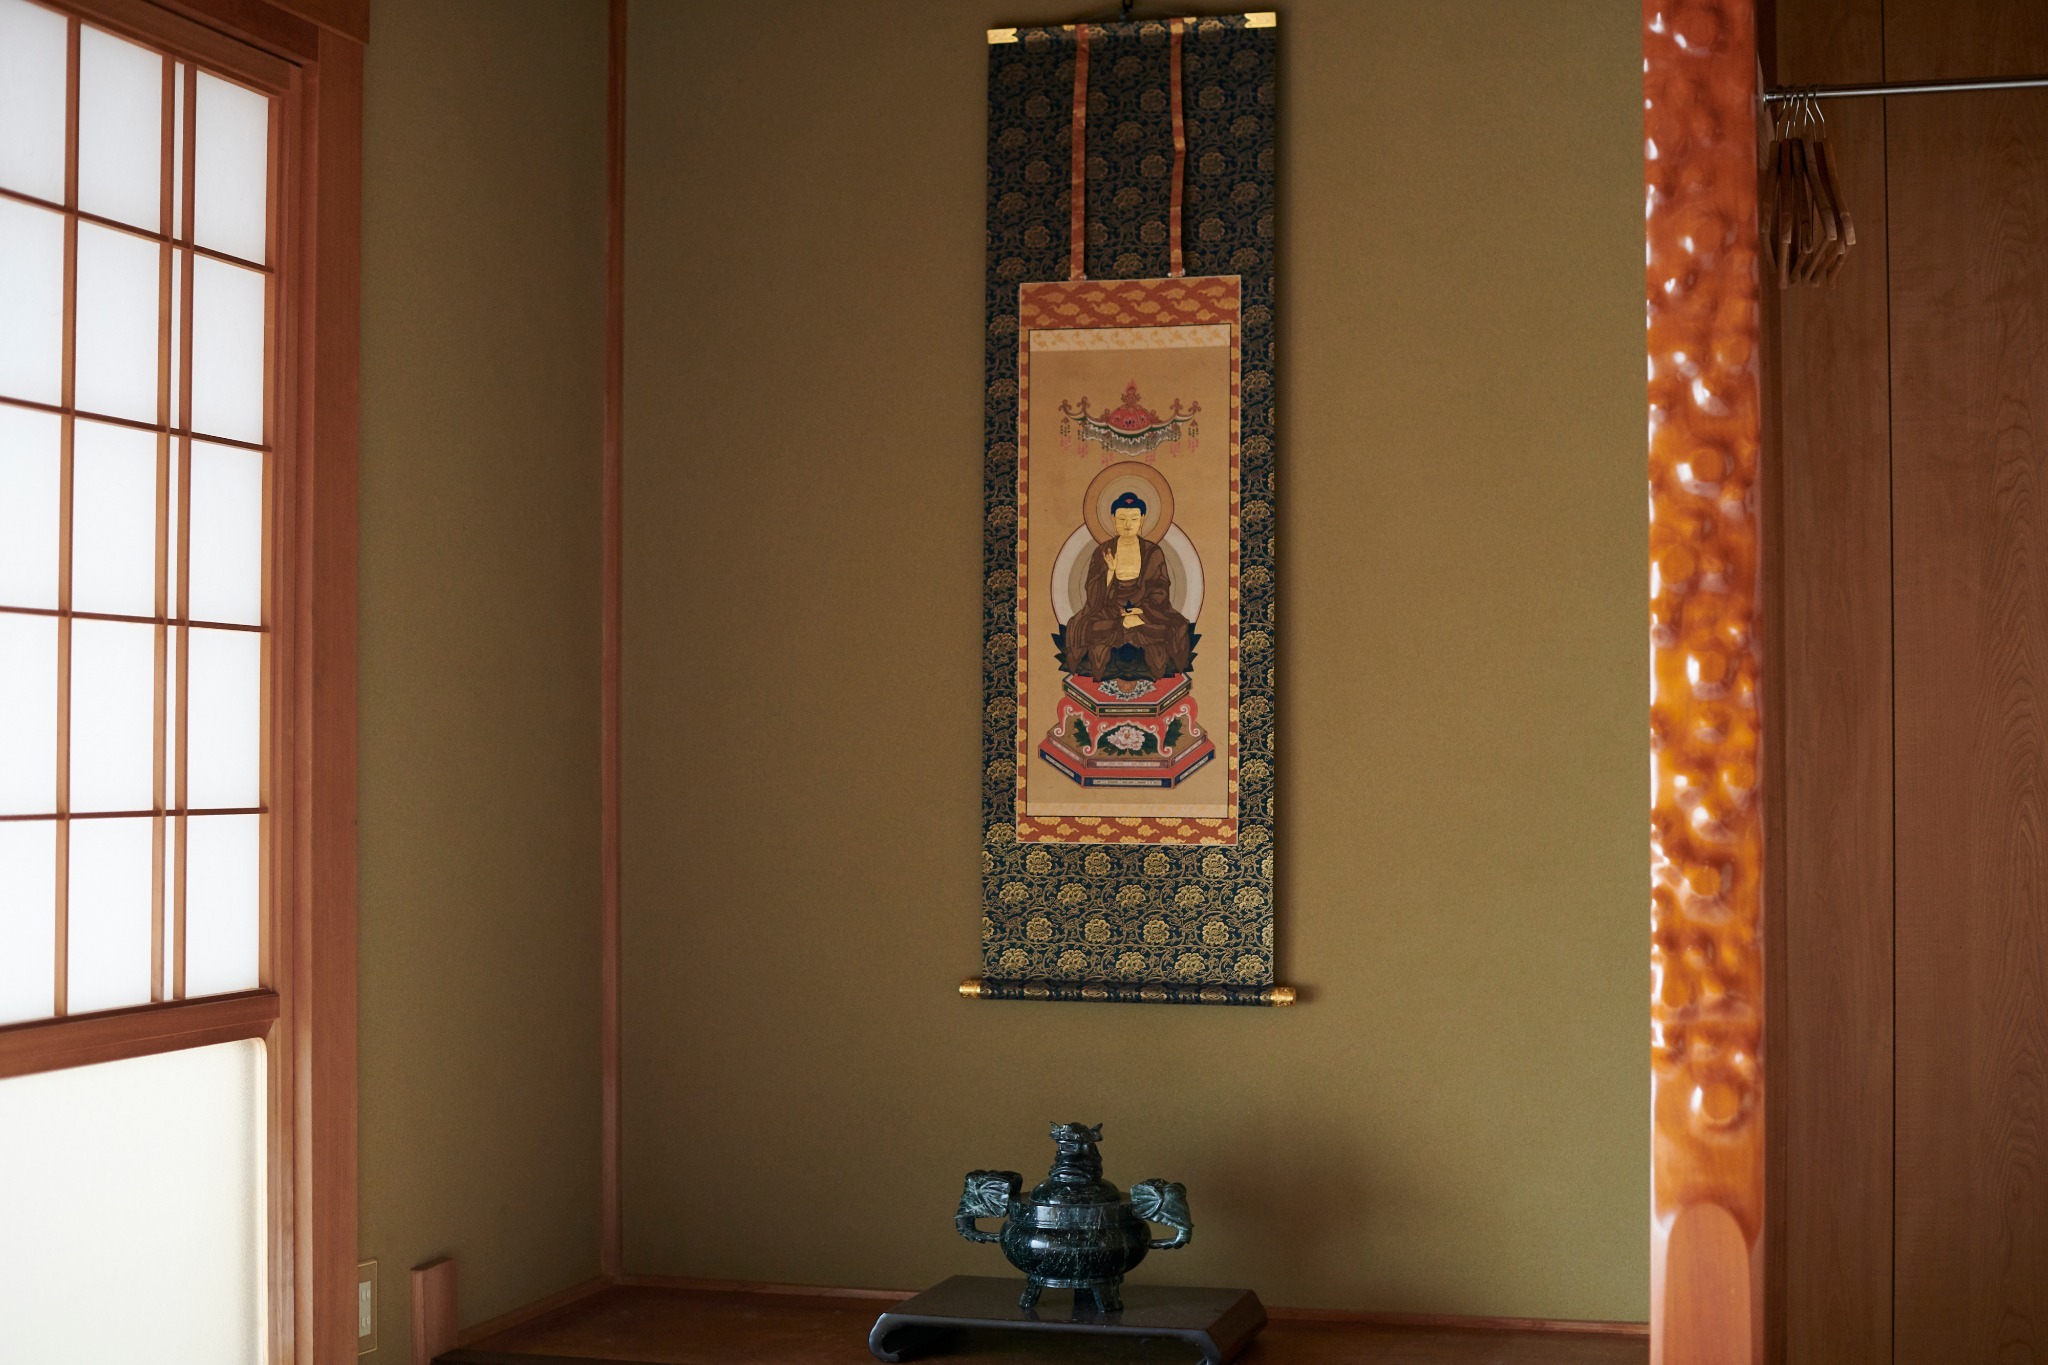 The tokonoma, a Japanese-style alcove, is a recess built into the wall of a Japanese-style room. A scroll called kakejiku in Japanese, is hung on the back wall of the alcove. 床の間の掛け軸をお楽しみください。